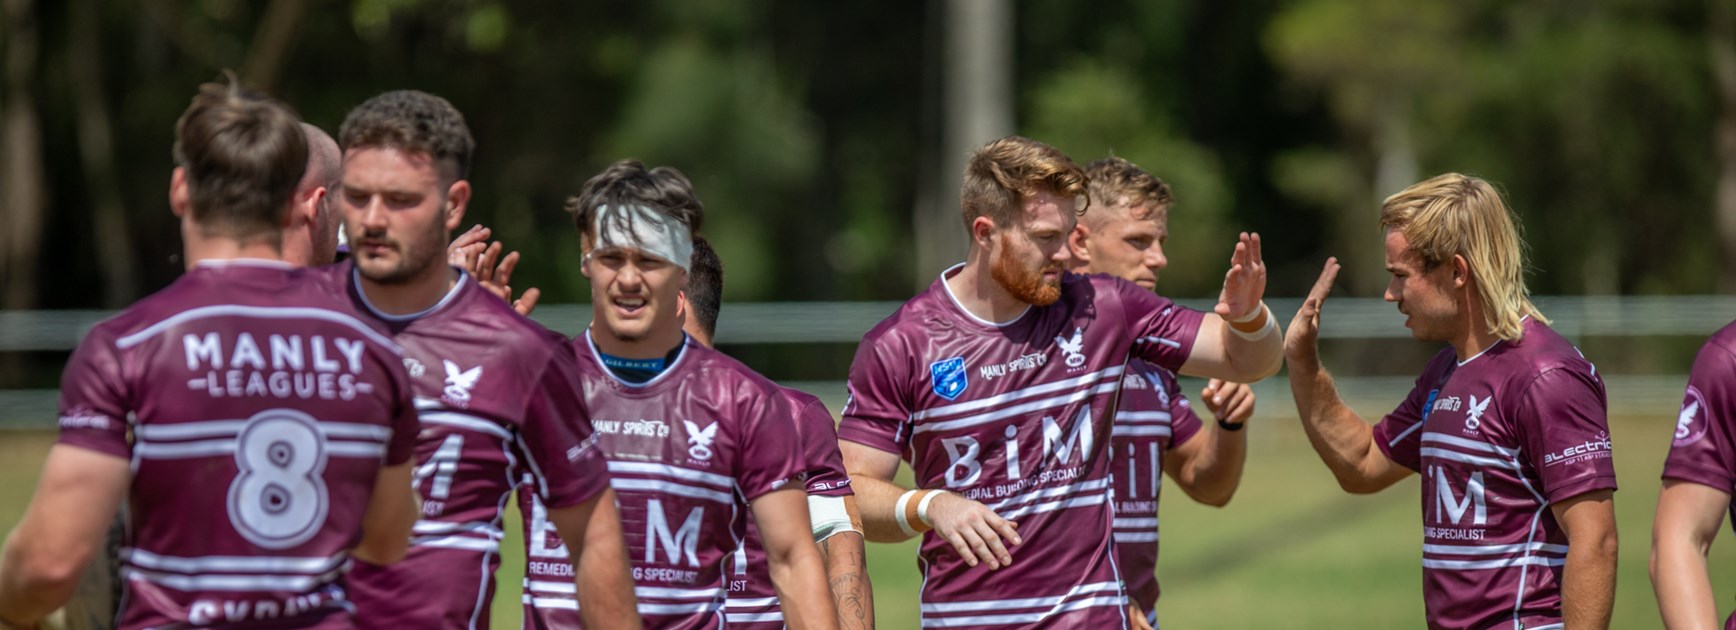 Manly Leagues almost snatch victory in Sydney Shield